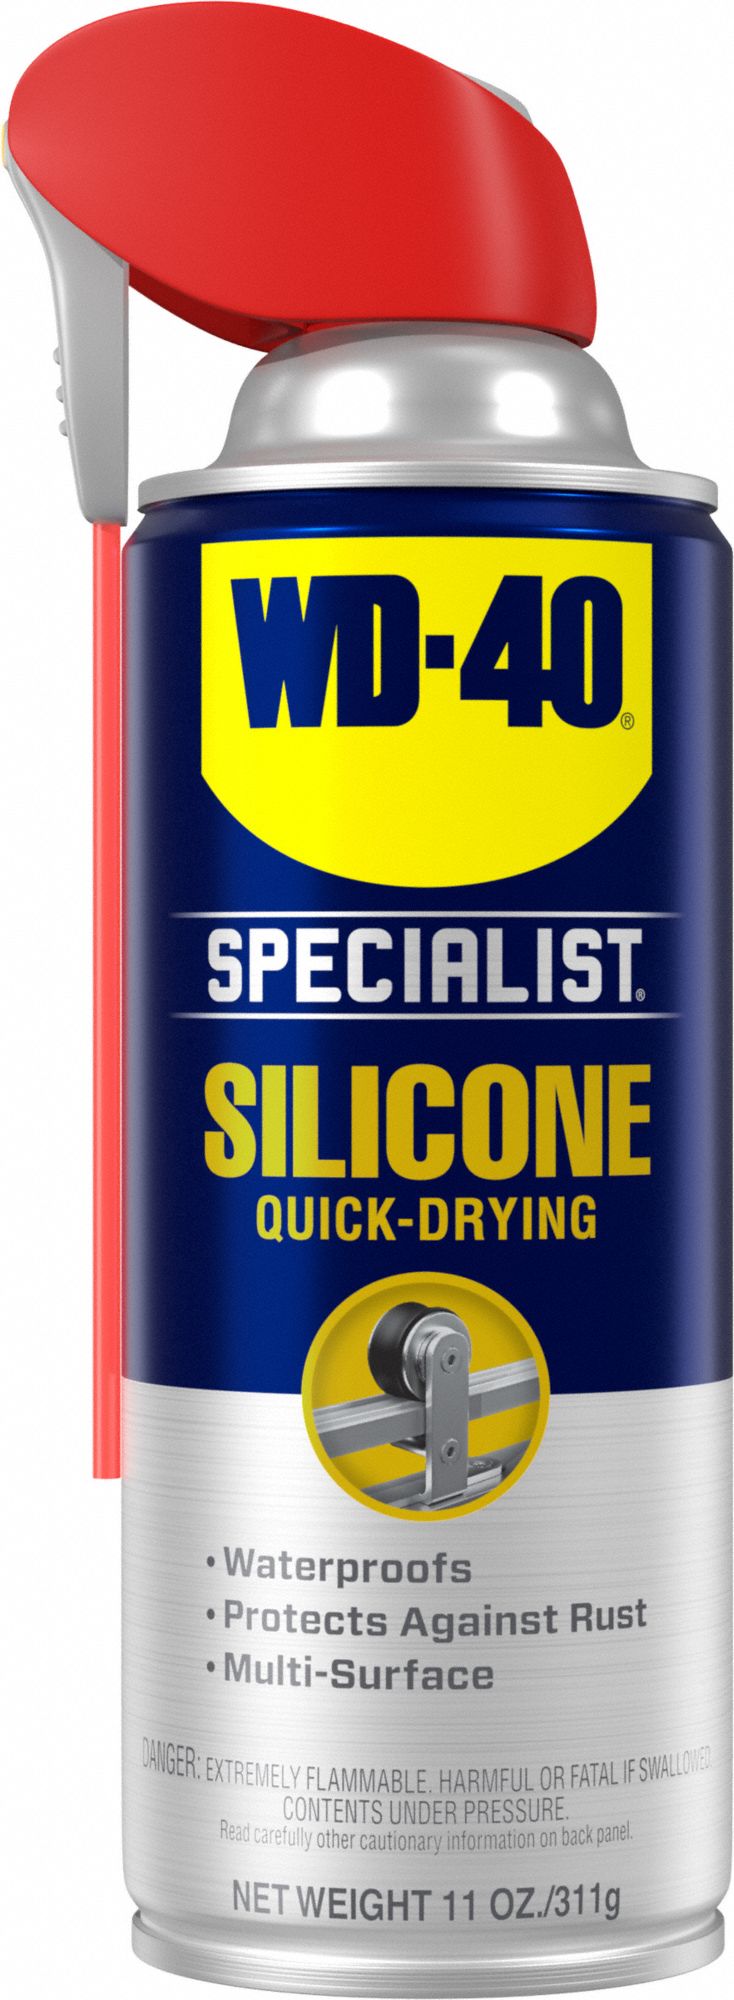 General Purpose Dry Lubricant: -100° to 500°F, H2 No Food Contact, Silicone, 11 oz, Aerosol Can